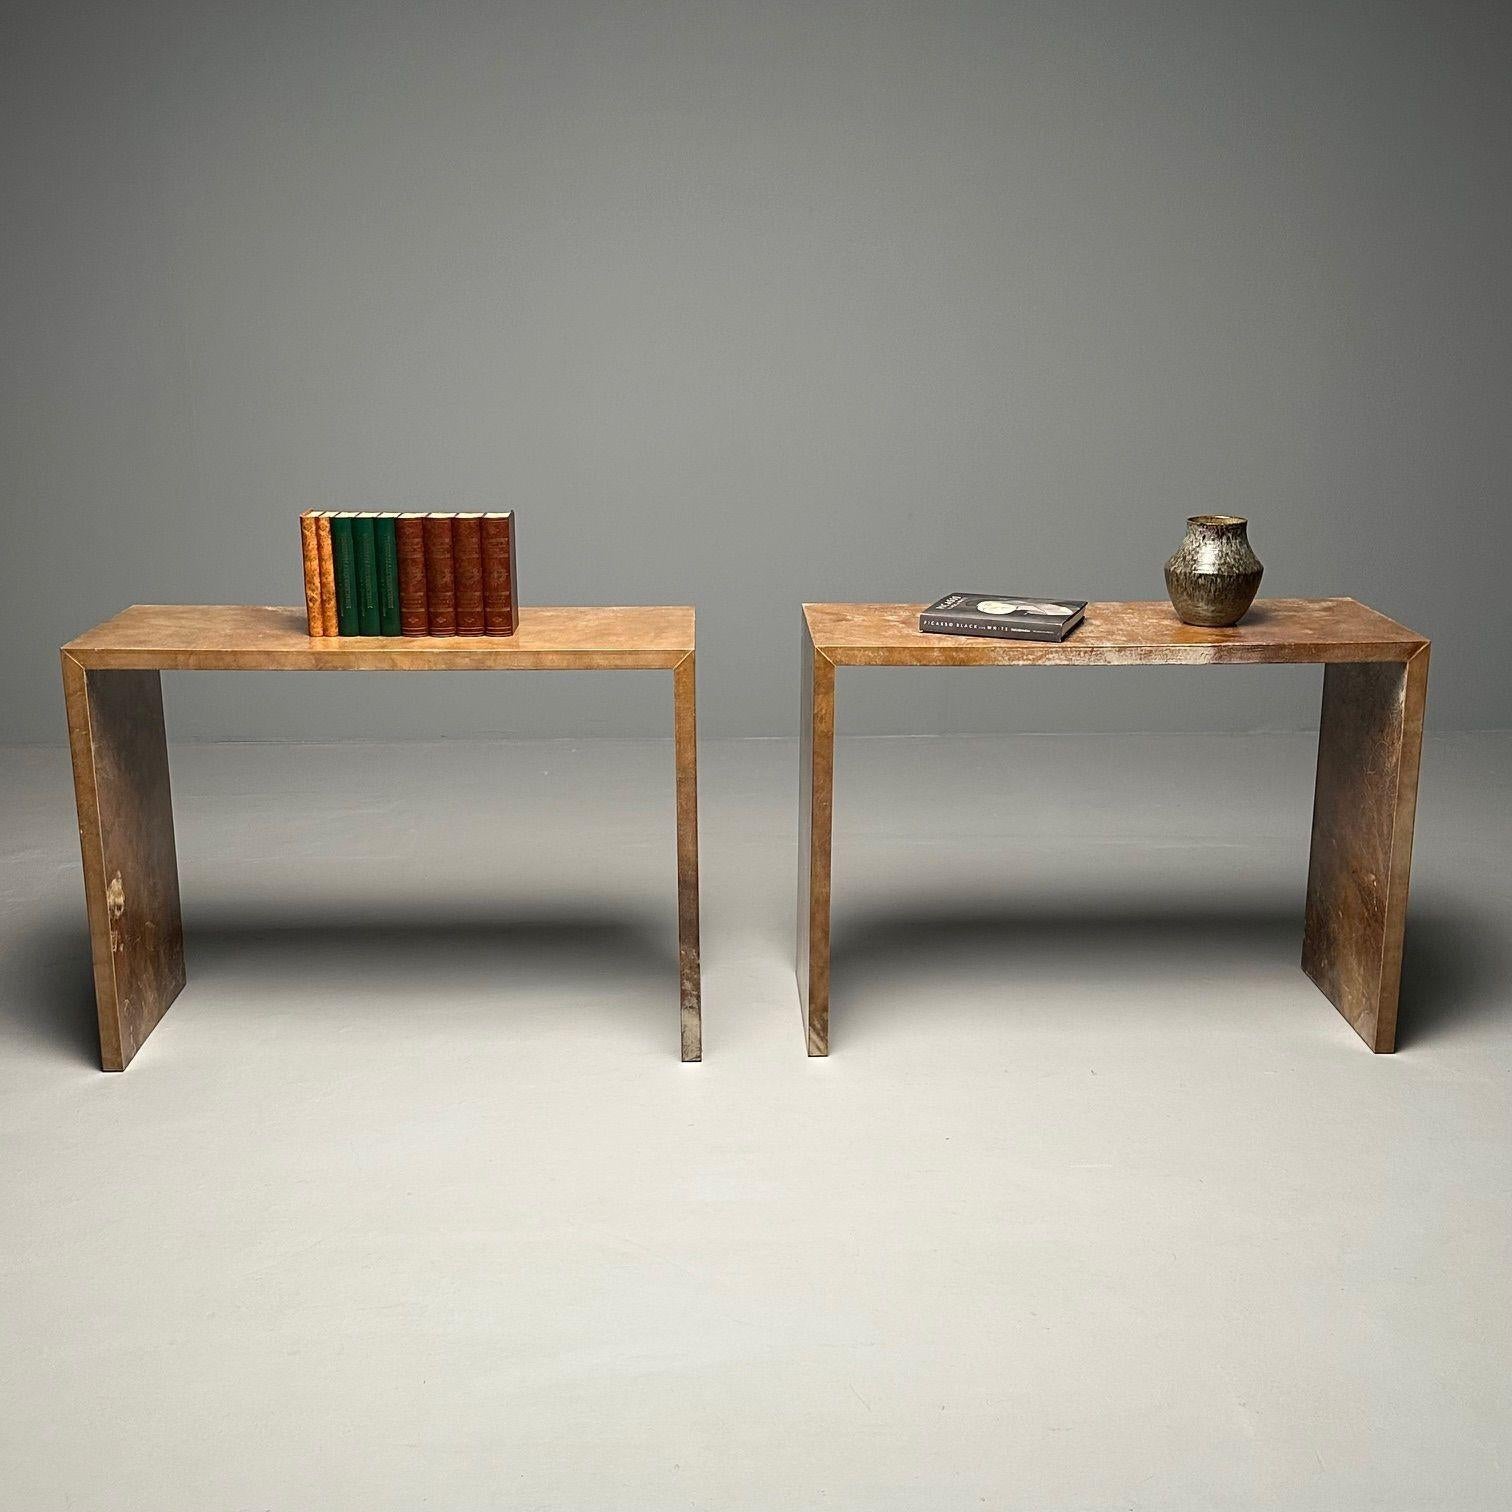 Wood Jean-Michel Frank Style, Contemporary, Parchment Consoles, Sofa Tables, 2020s For Sale